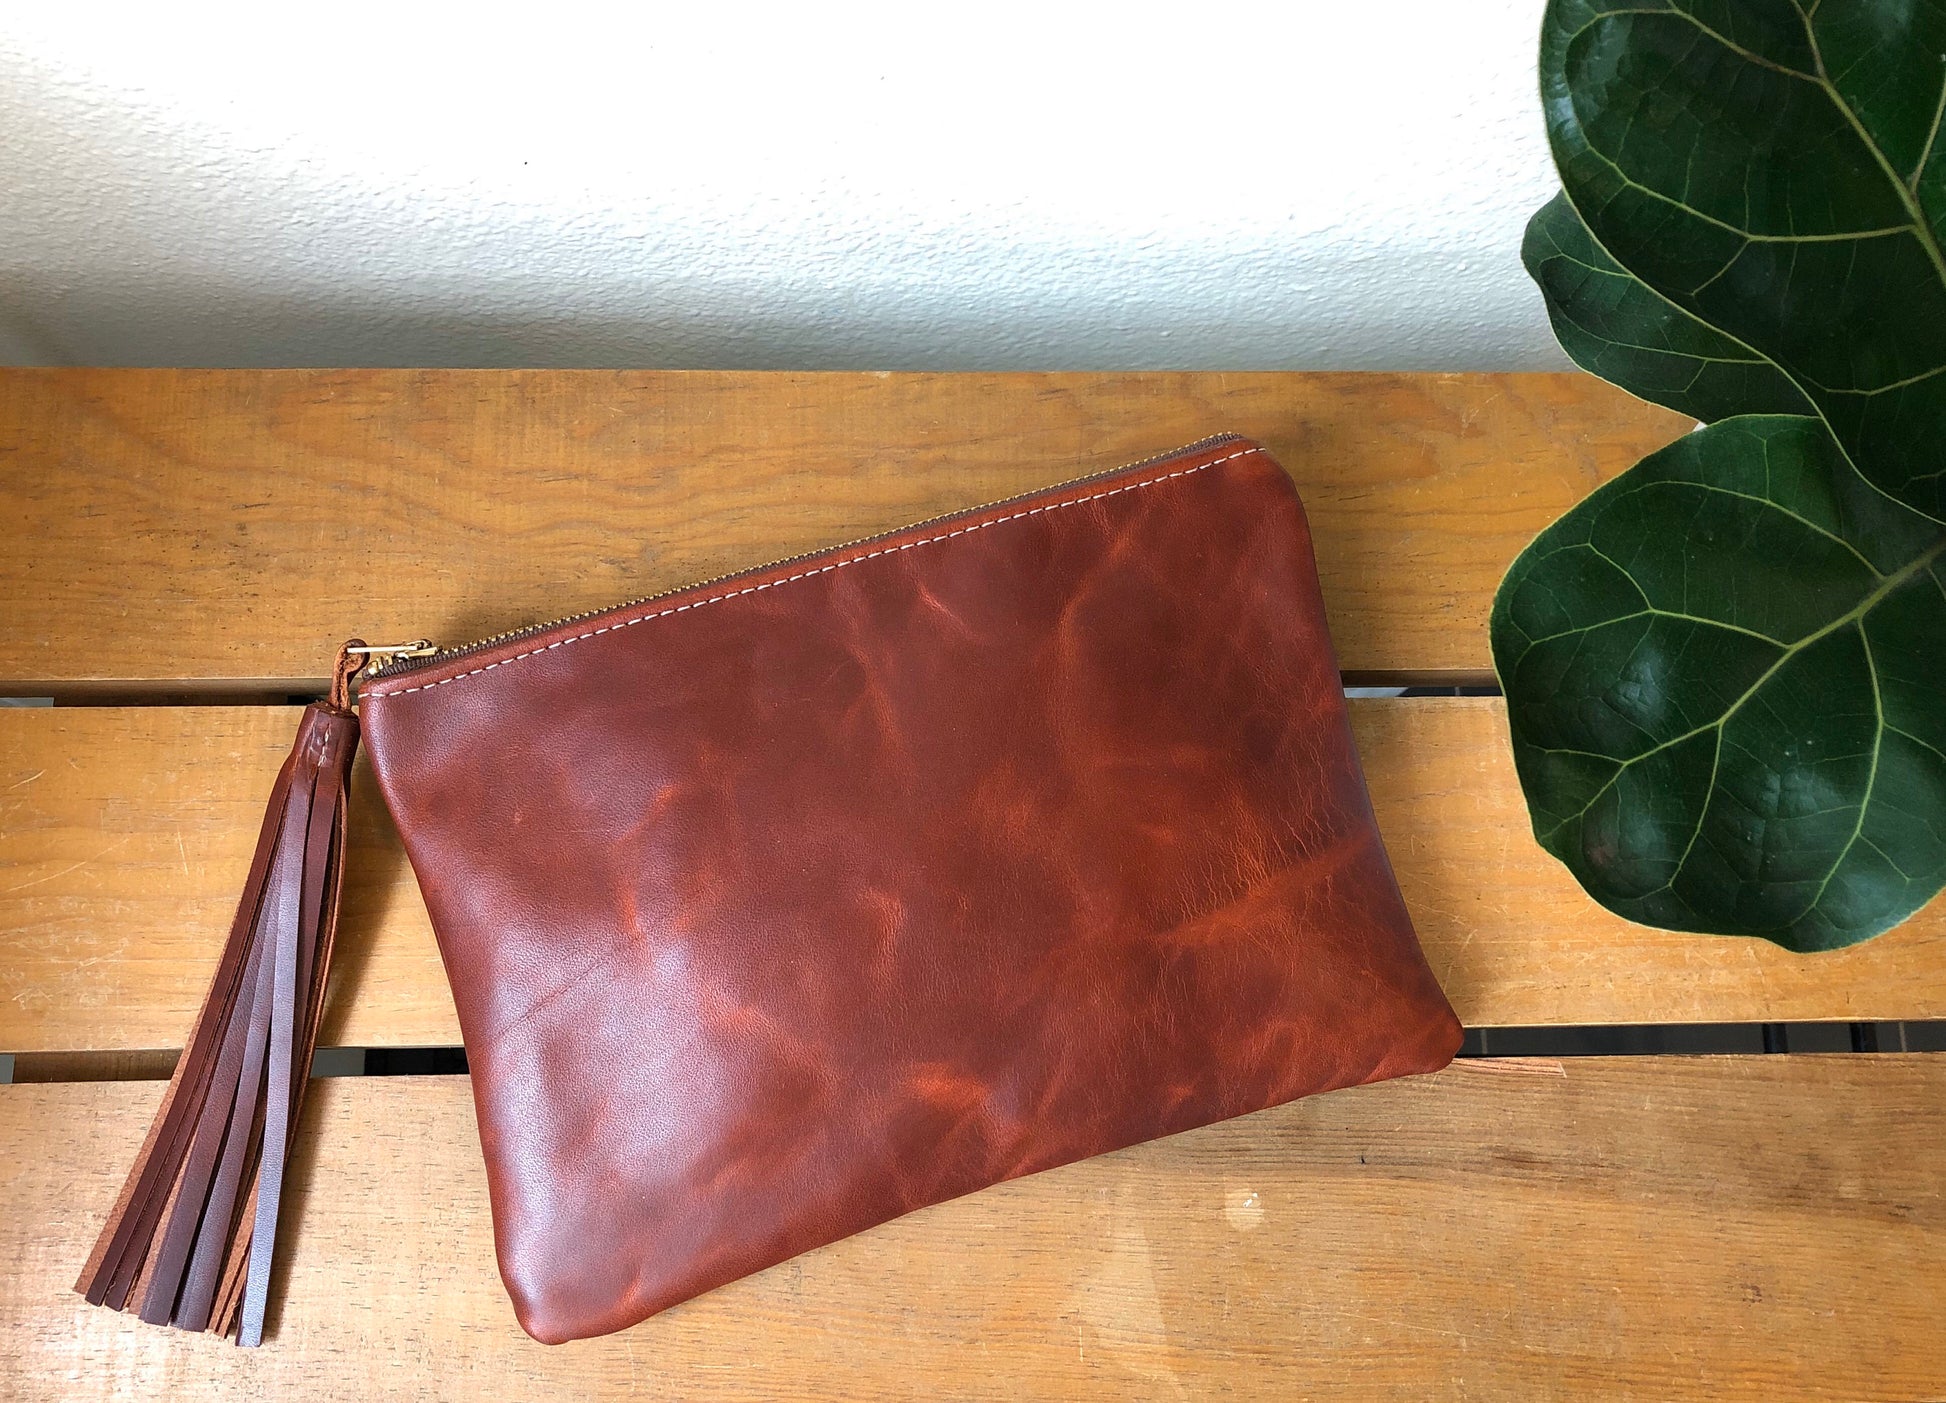 Rich, red brown, tasseled leather clutch lies on wooden table near deep green plant.